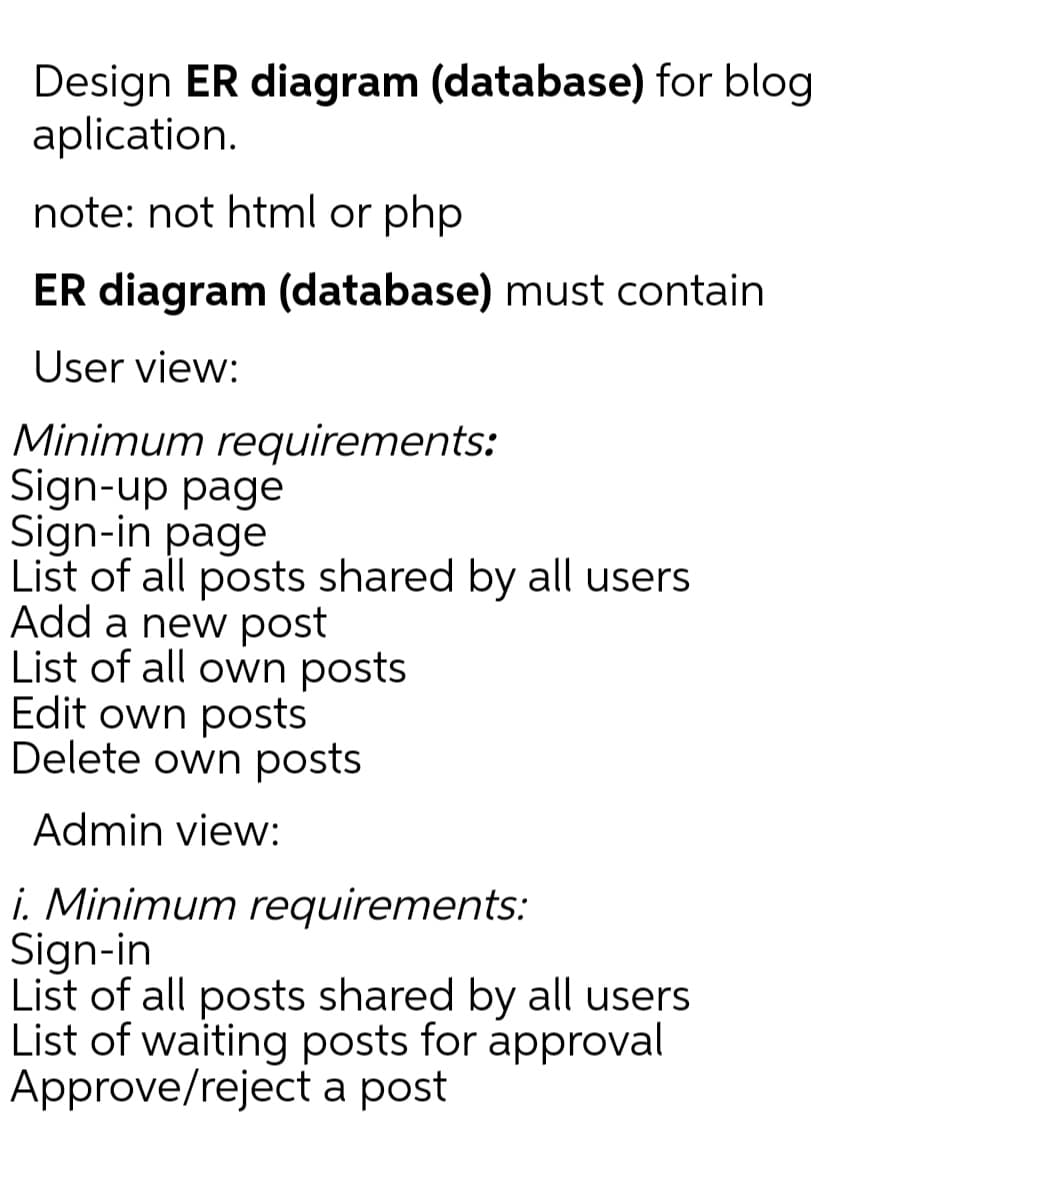 Design ER diagram (database) for blog
aplication.
note: not html or php
ER diagram (database) must contain
User view:
Minimum requirements:
Sign-up page
Sign-in page
List of all posts shared by all users
Add a new post
List of all own posts
Edit own posts
Delete own posts
Admin view:
i. Minimum requirements:
Sign-in
List of all posts shared by all users
List of waiting posts for approval
Approve/reject a post
